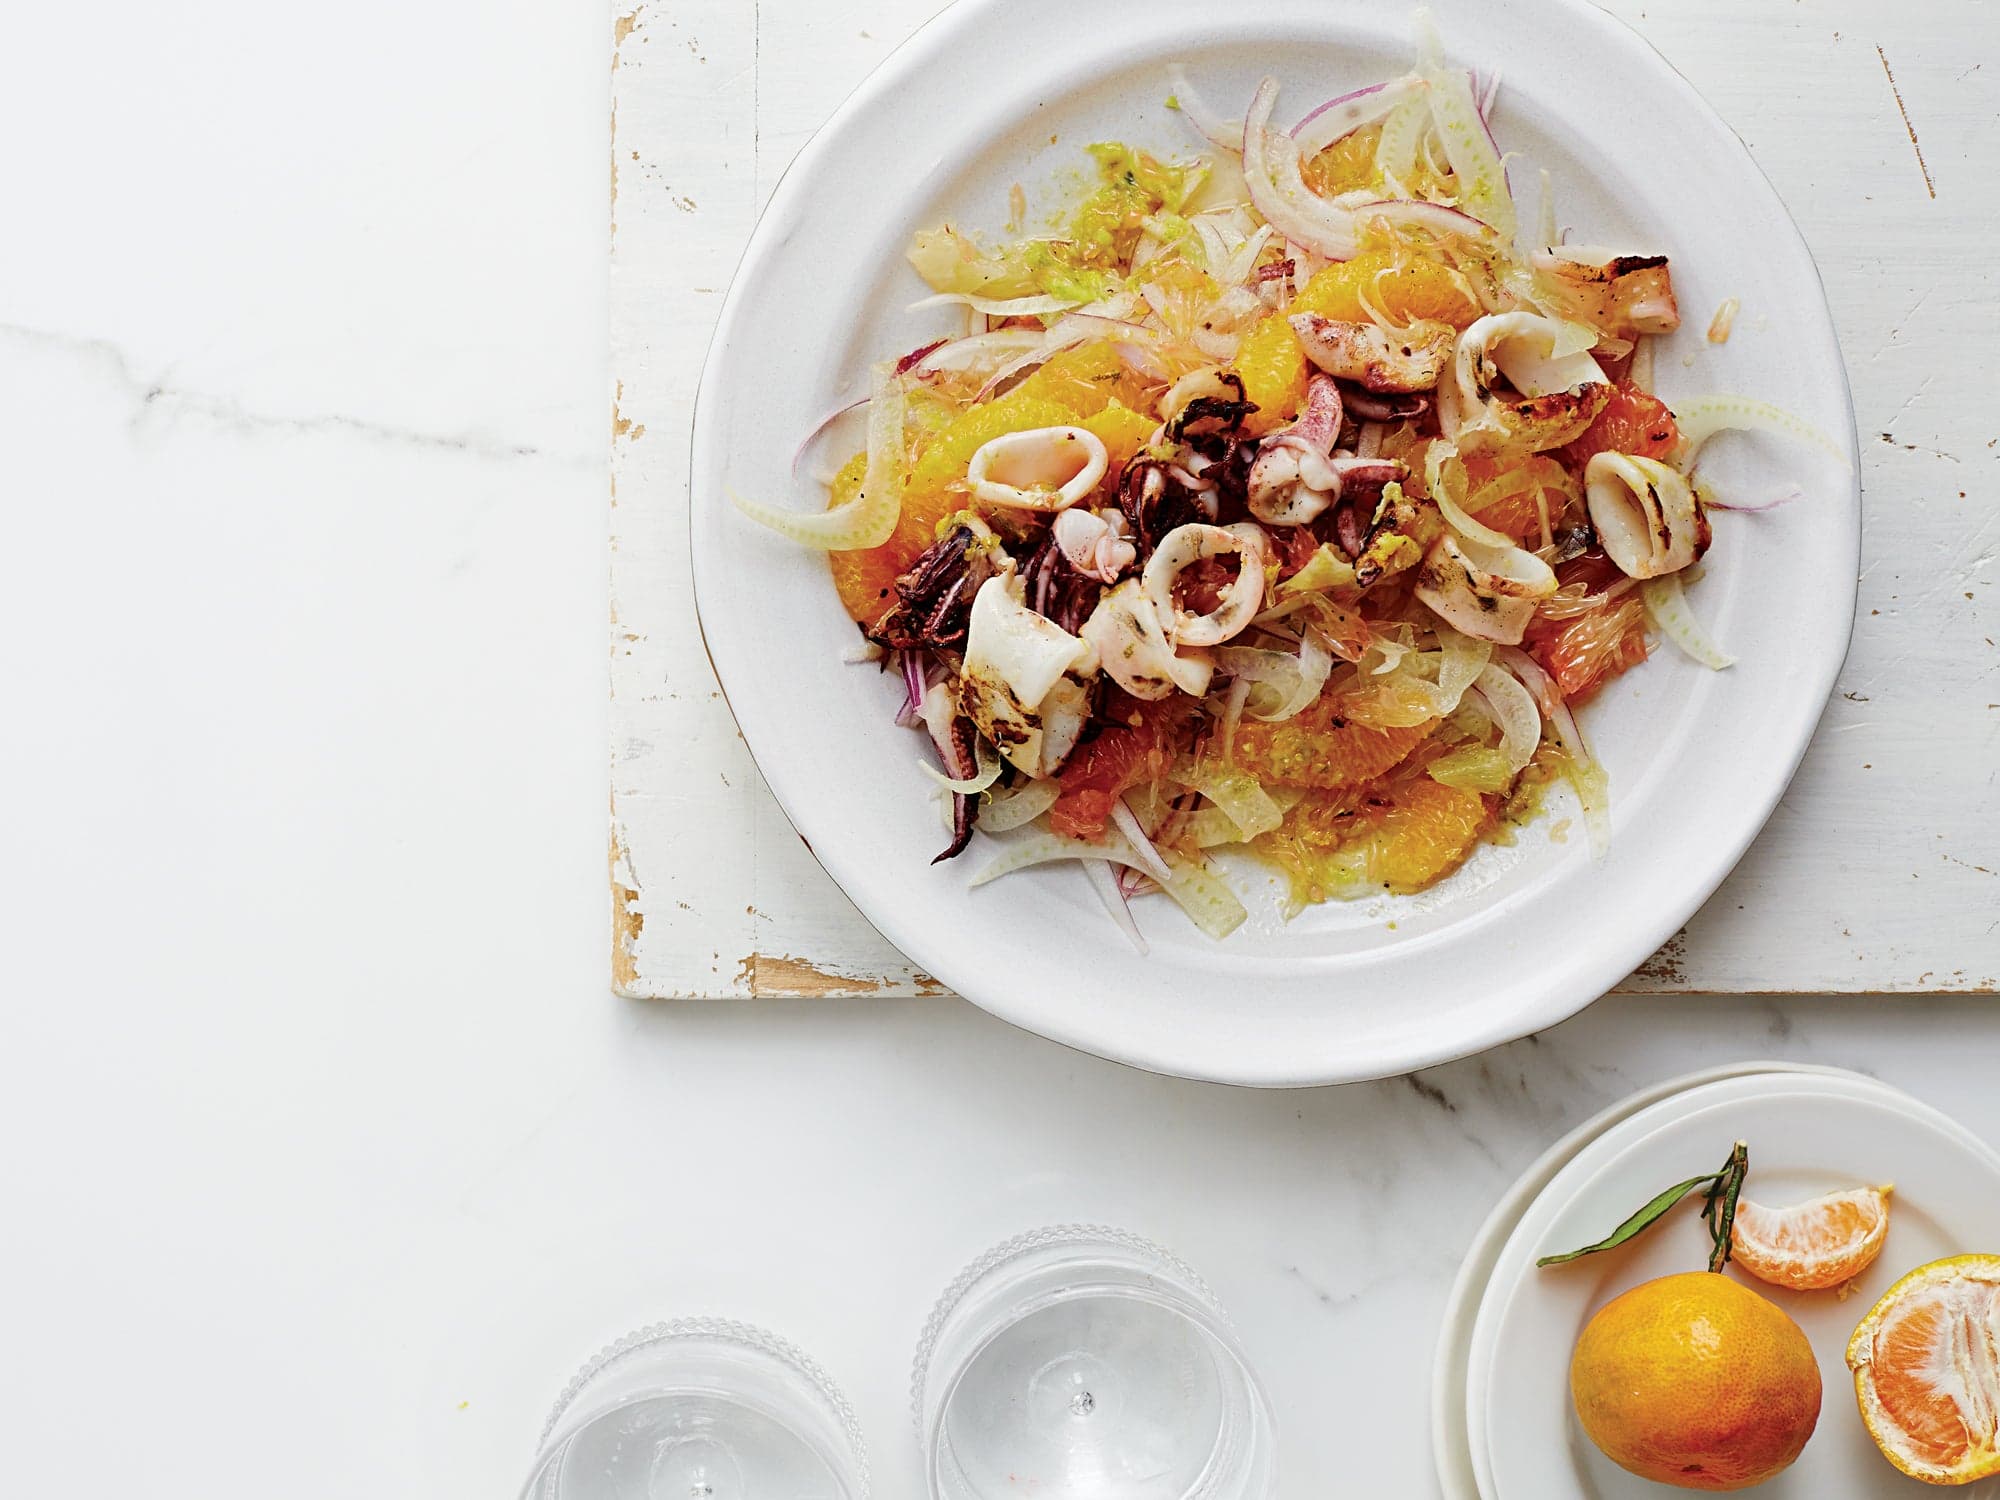 Fennel and Citrus Salad with Charred Squid